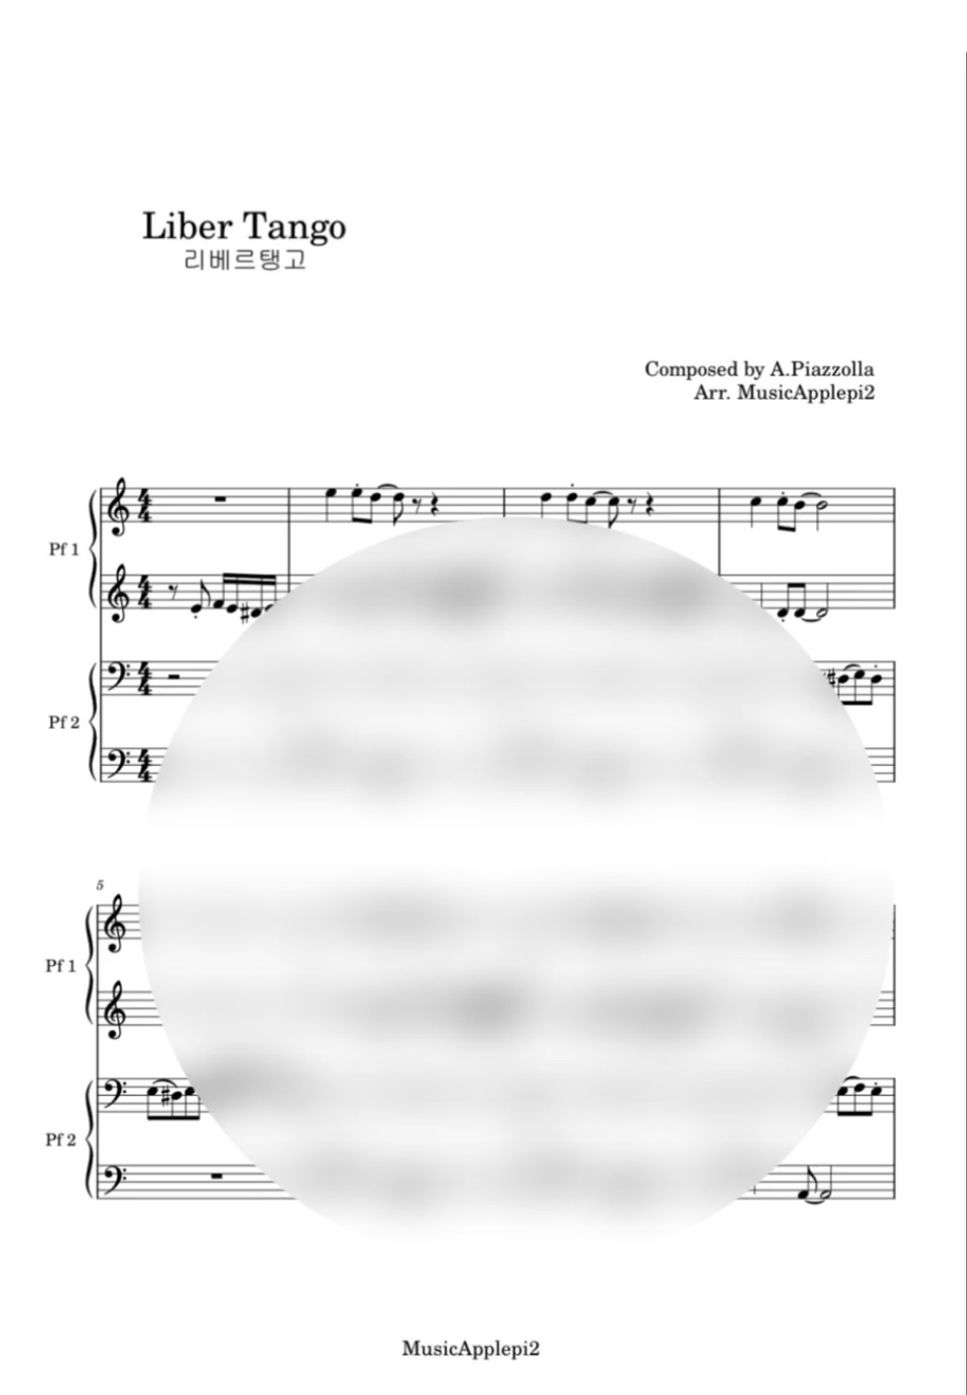 A.Piazzolla - Liber Tango 3종 (solo(very easy+easy) + 4hands) by MusicApplepie